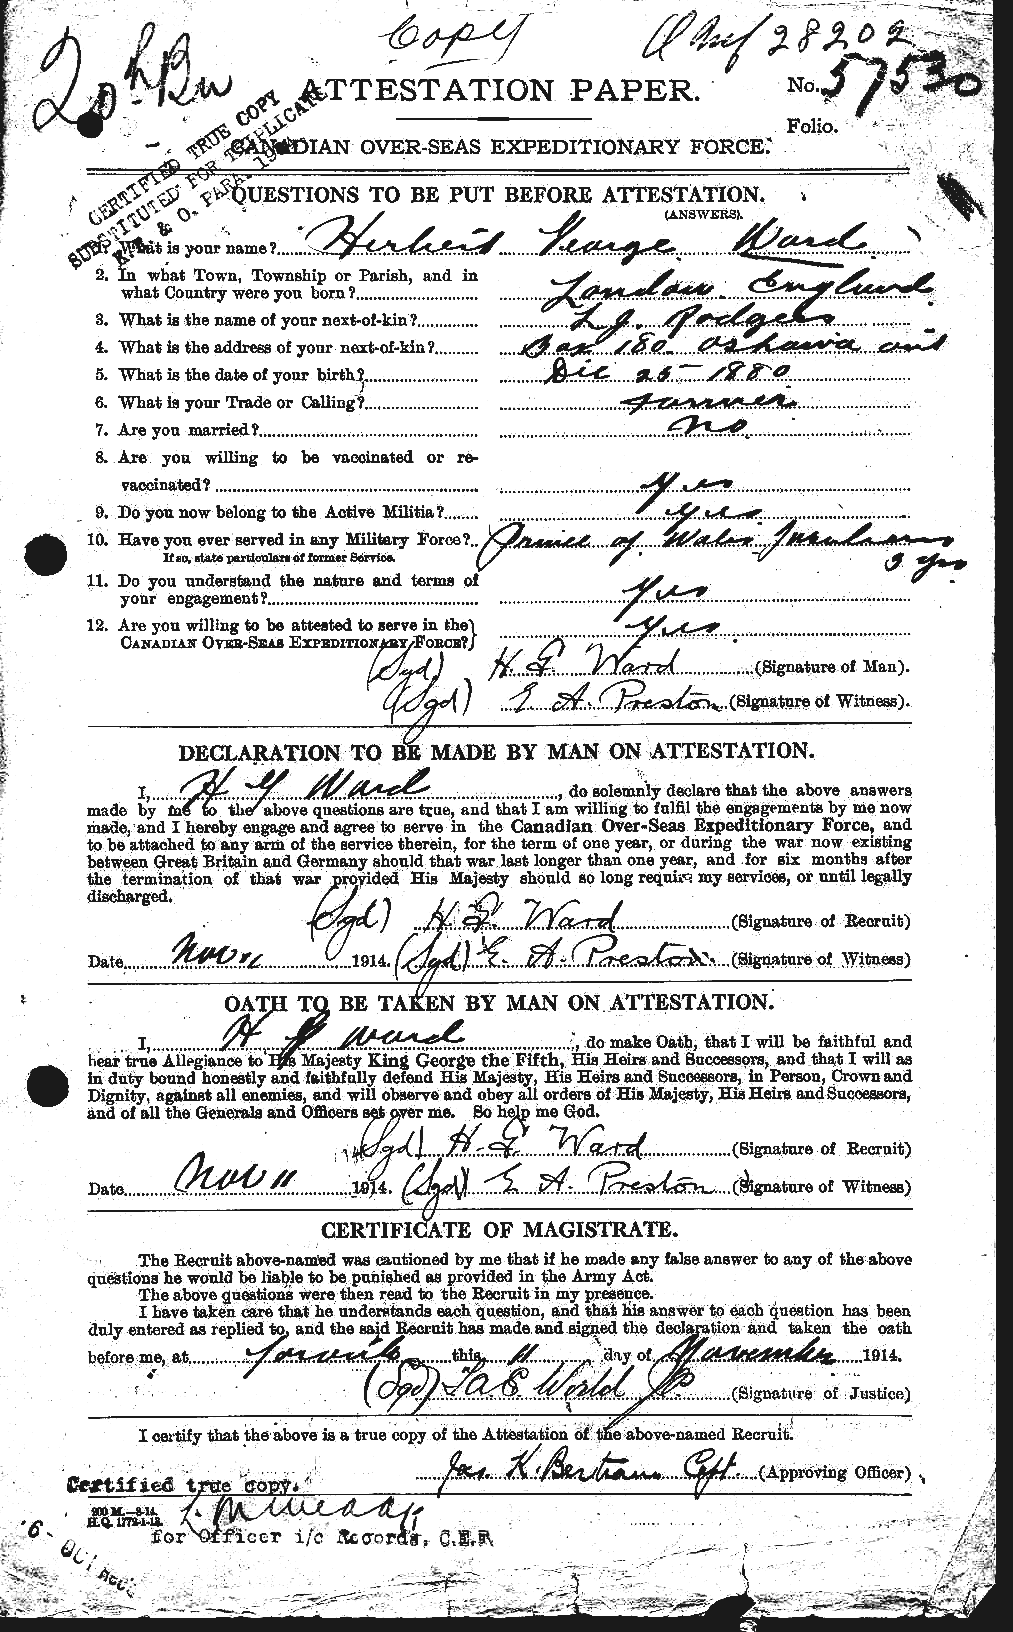 Personnel Records of the First World War - CEF 657853a